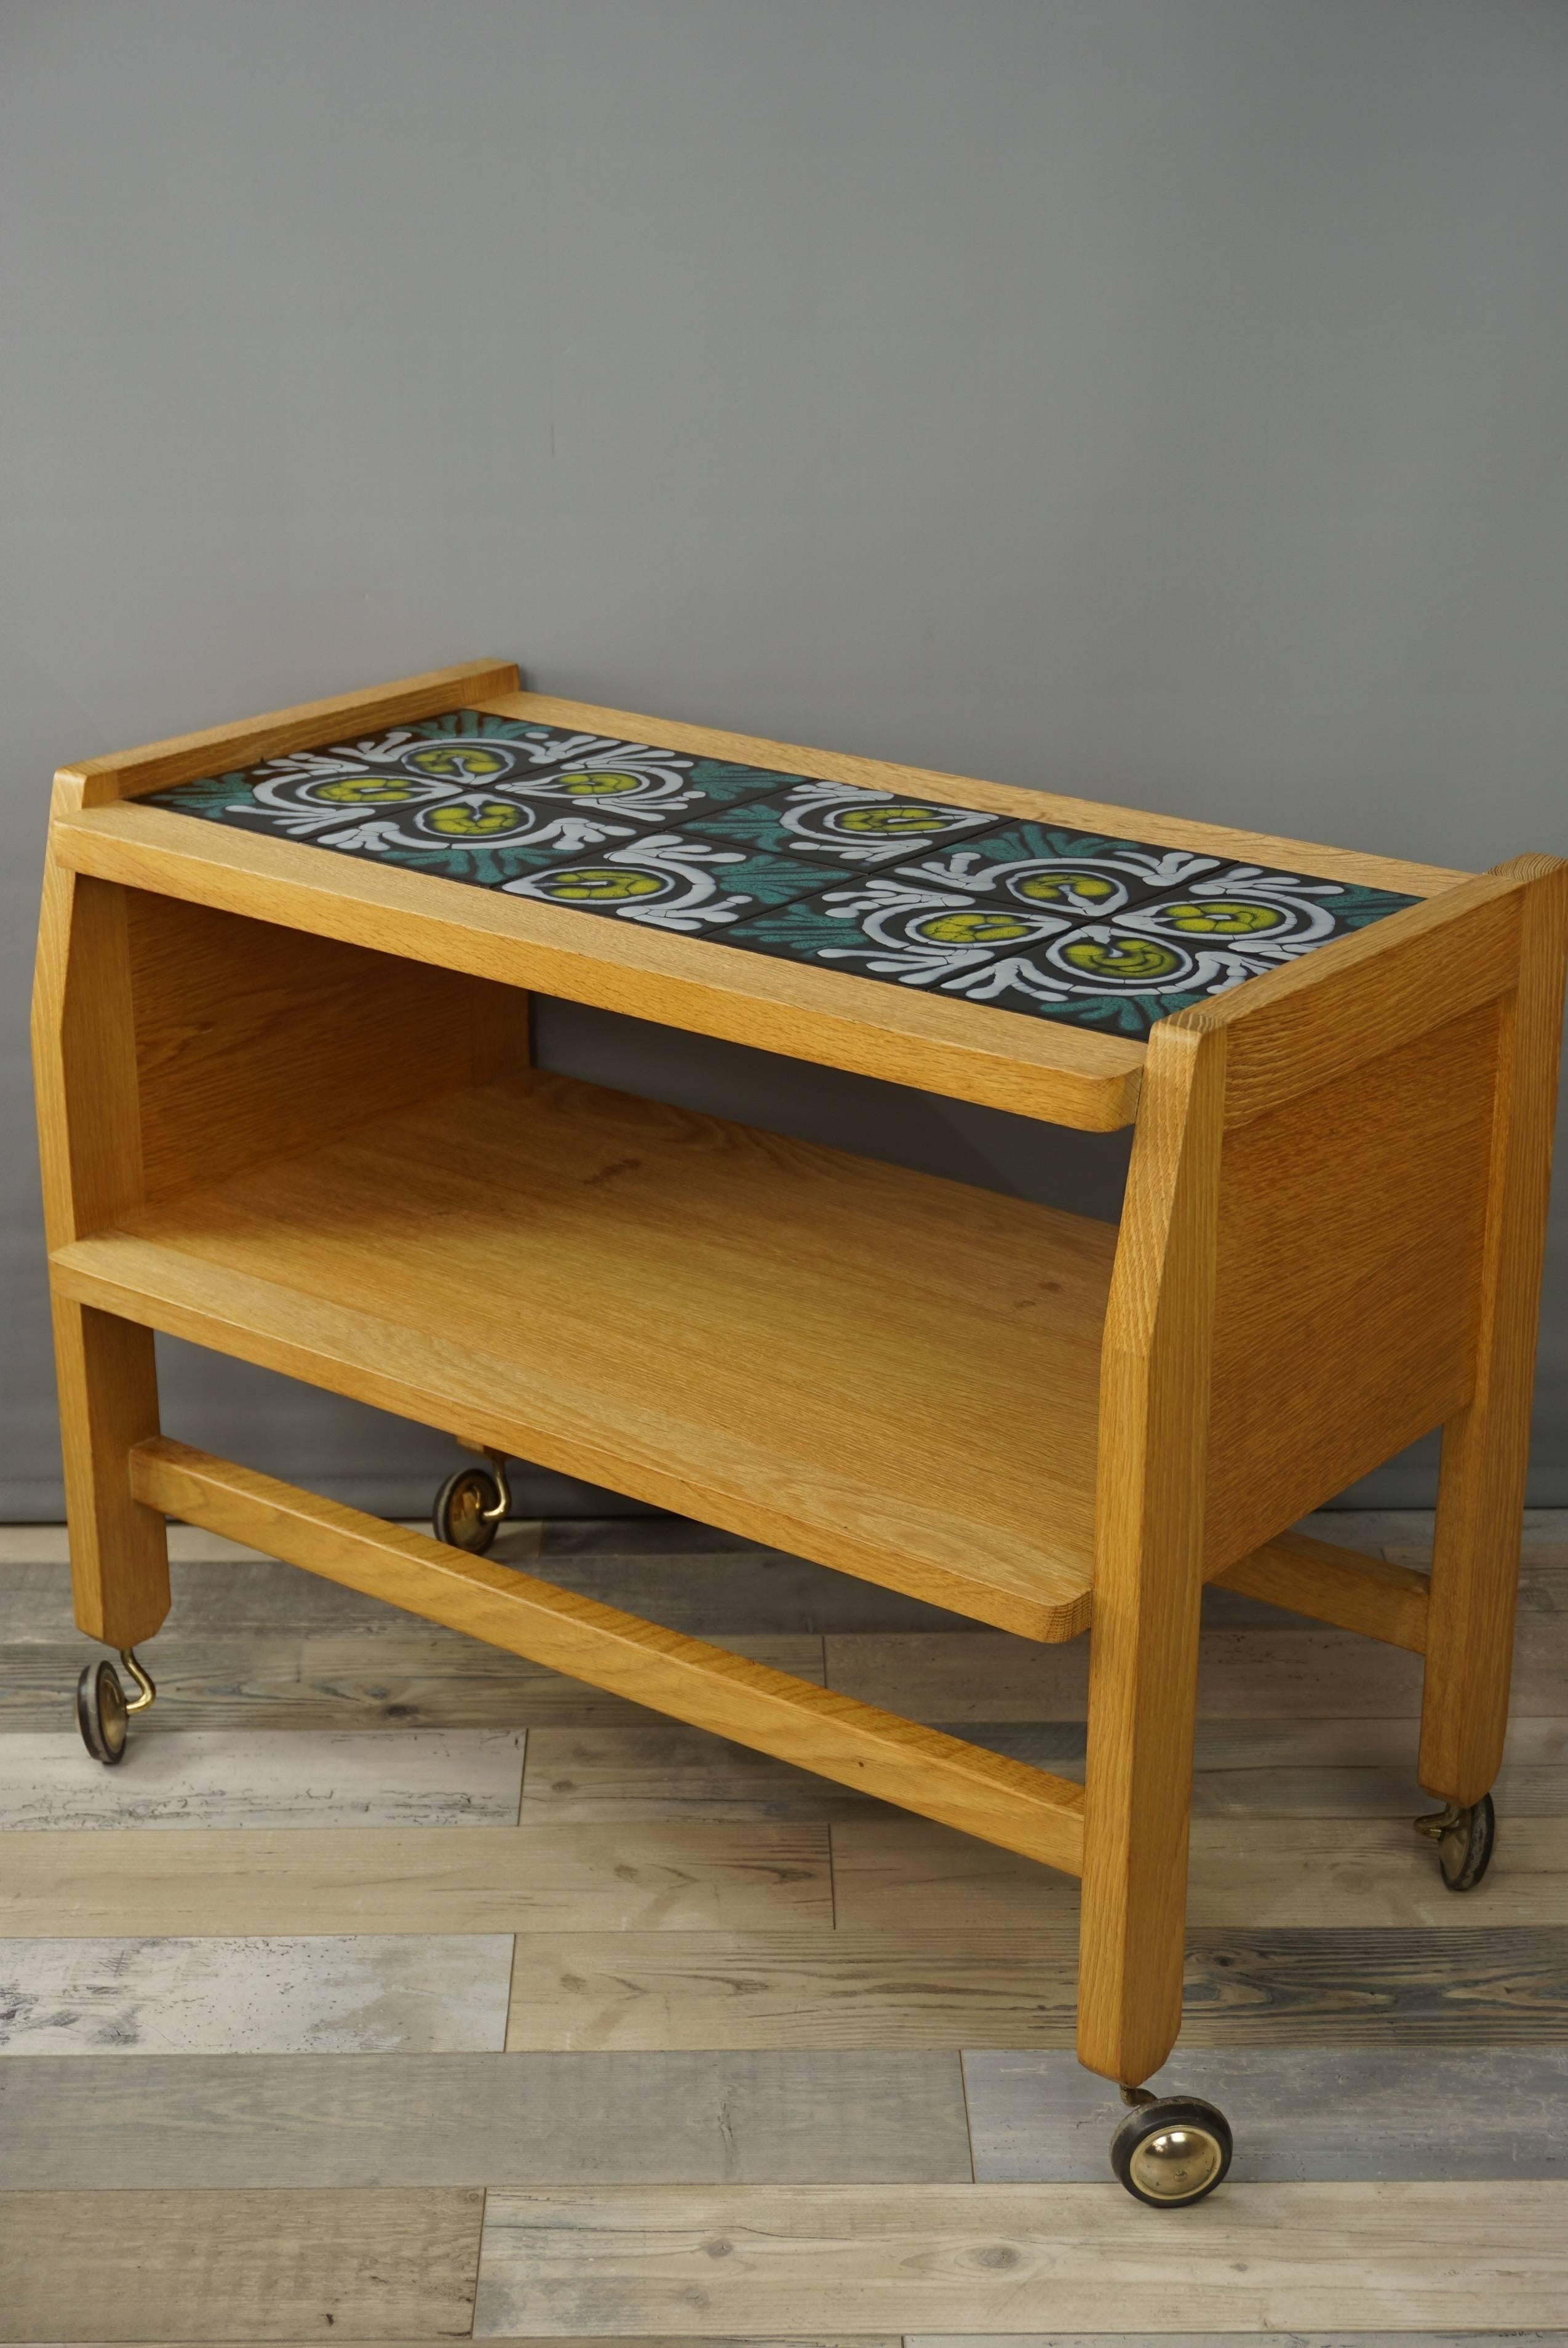 Light solid wood and patterned Boleslaw Danikowski's ceramic for this 1960s service table by Guillerme and Chambron (the famous North of France designer trio from the 1950s-1970s) for Votre Maison.